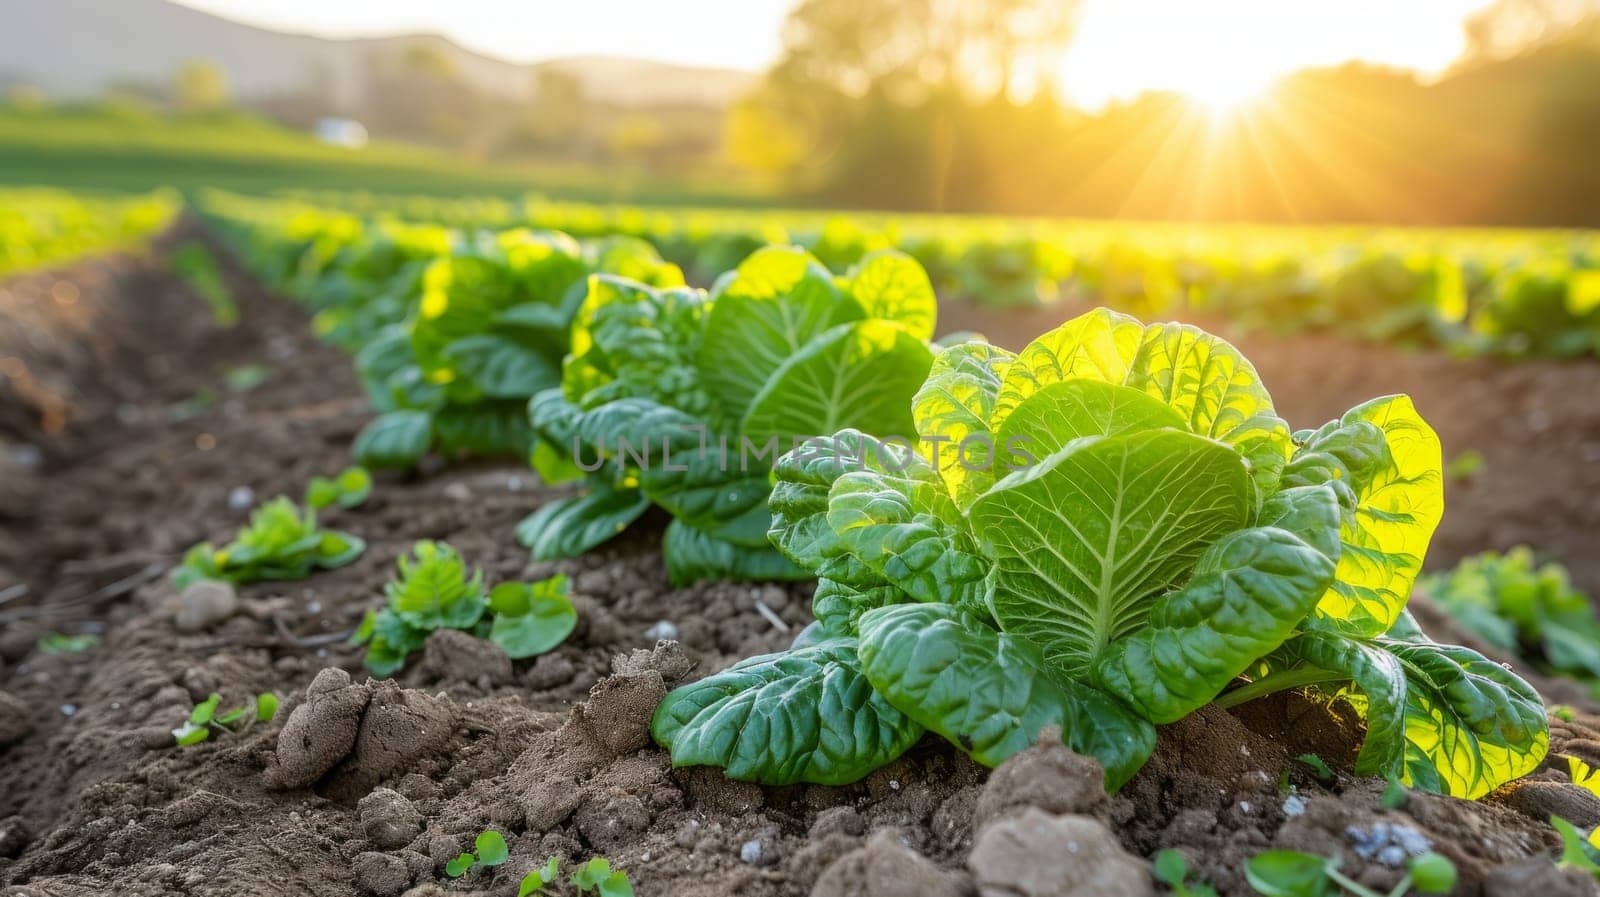 Green lettuce plants growing in field at sunset, concept of organic farming, agriculture and healthy eating